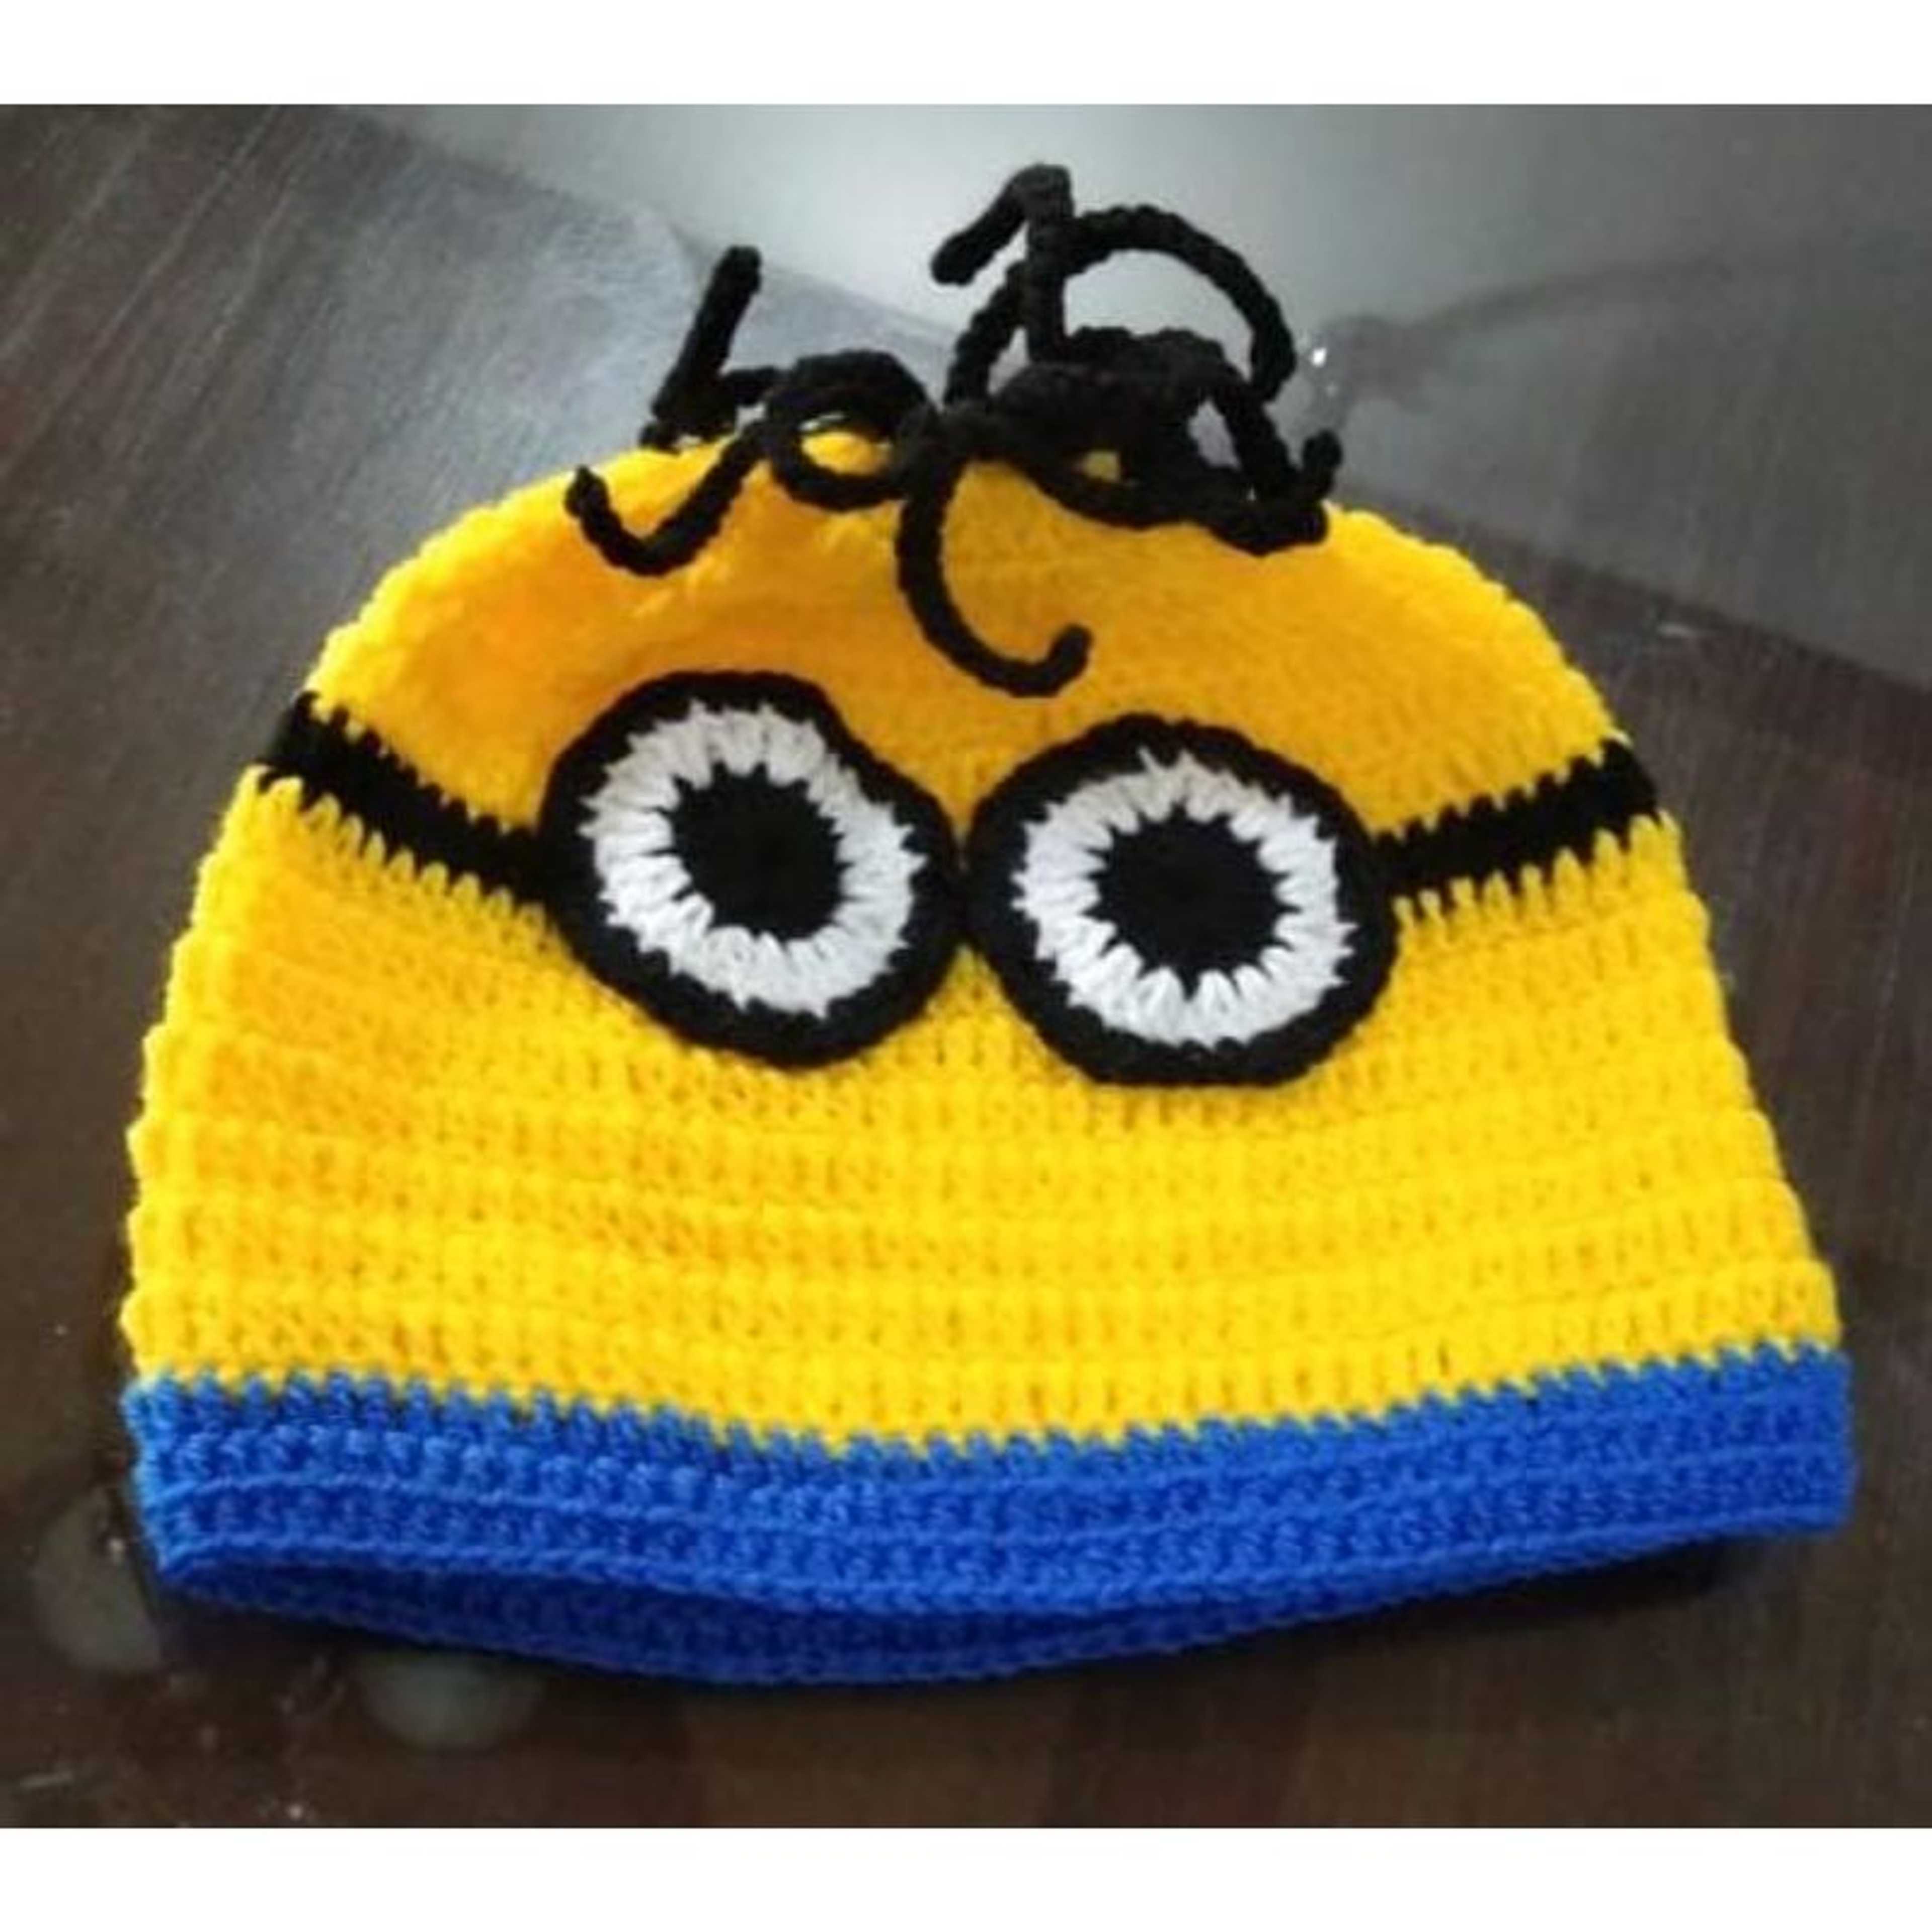 Knitted Minion Cap for Babies